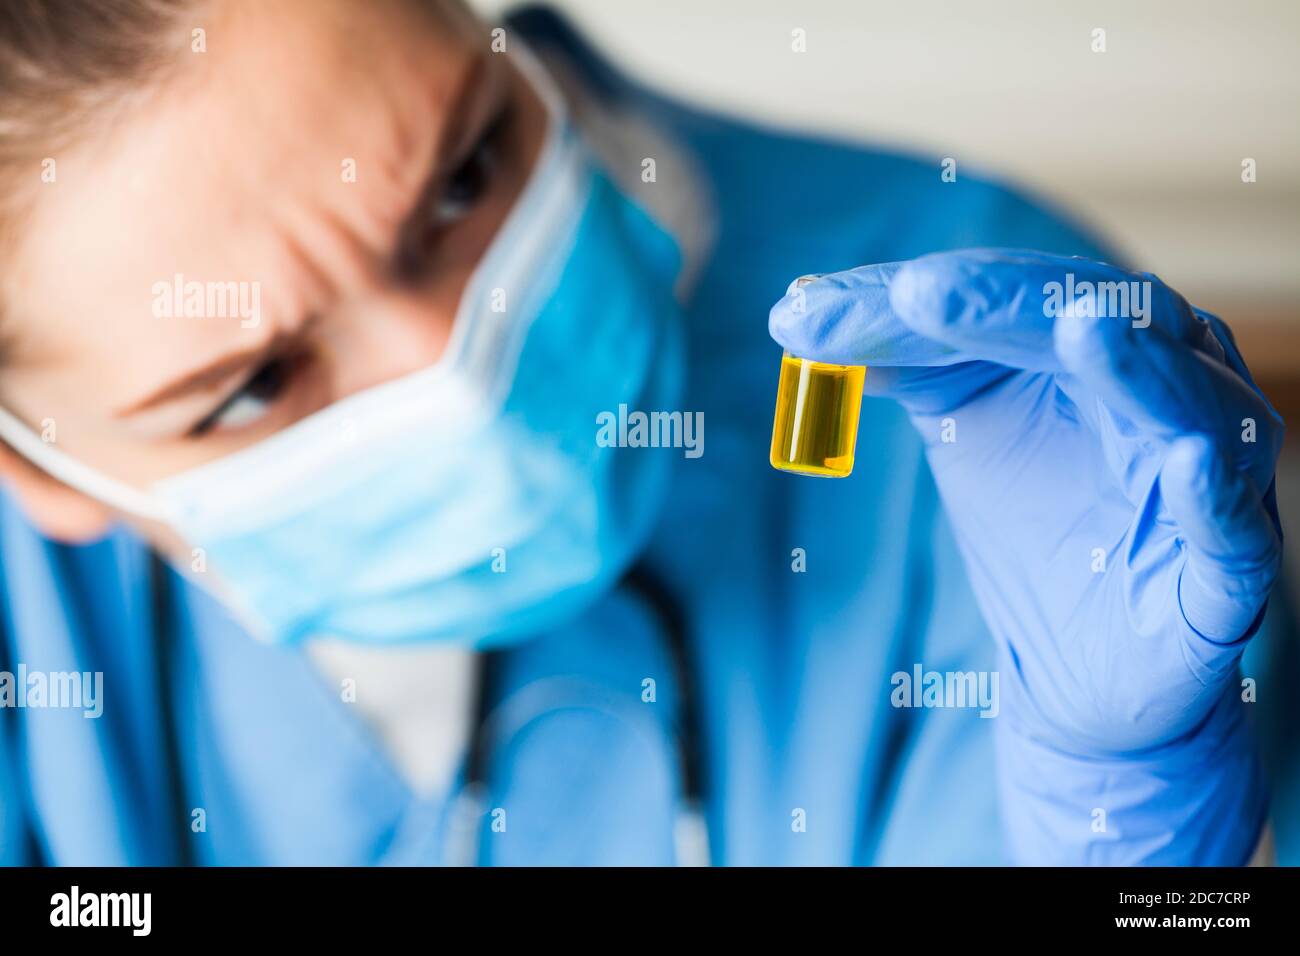 Medical worker inspecting ampoule vial bottle filled with yellow liquid,COVID-19 potential vaccine cure develop,convalescent patient platelet rich Stock Photo